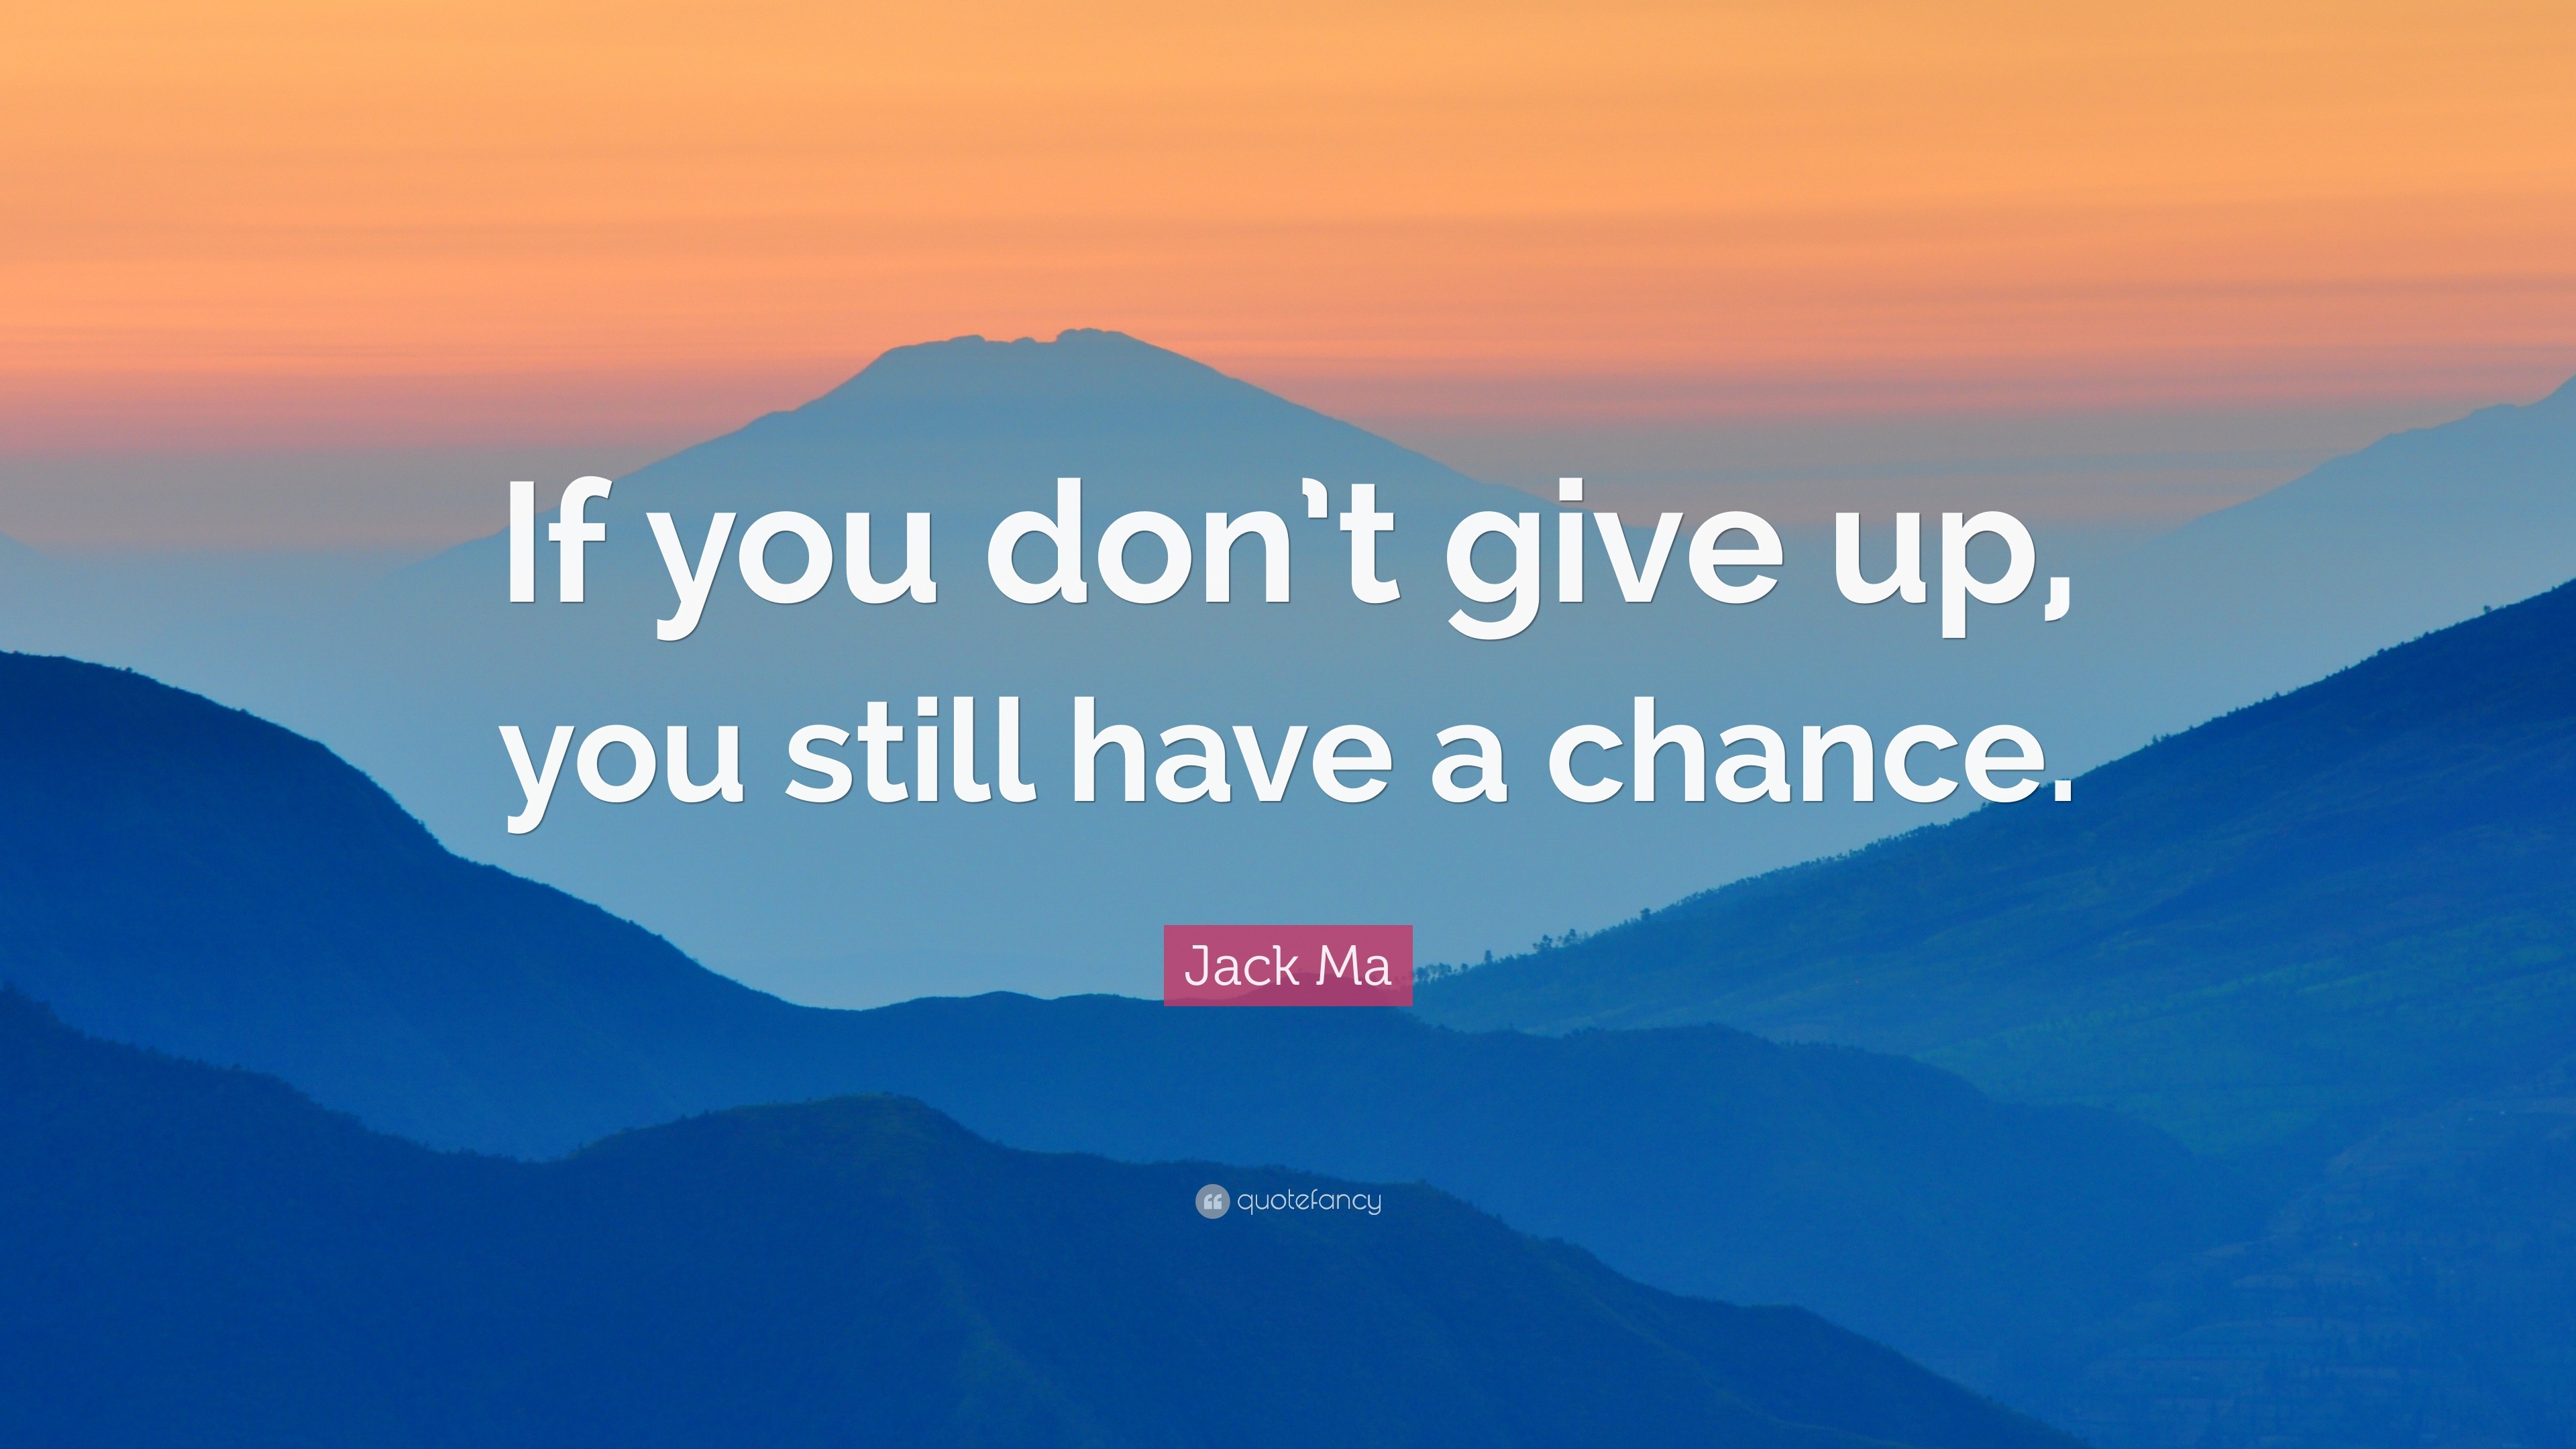 Jack Ma Quote: “If you don’t give up, you still have a chance.”